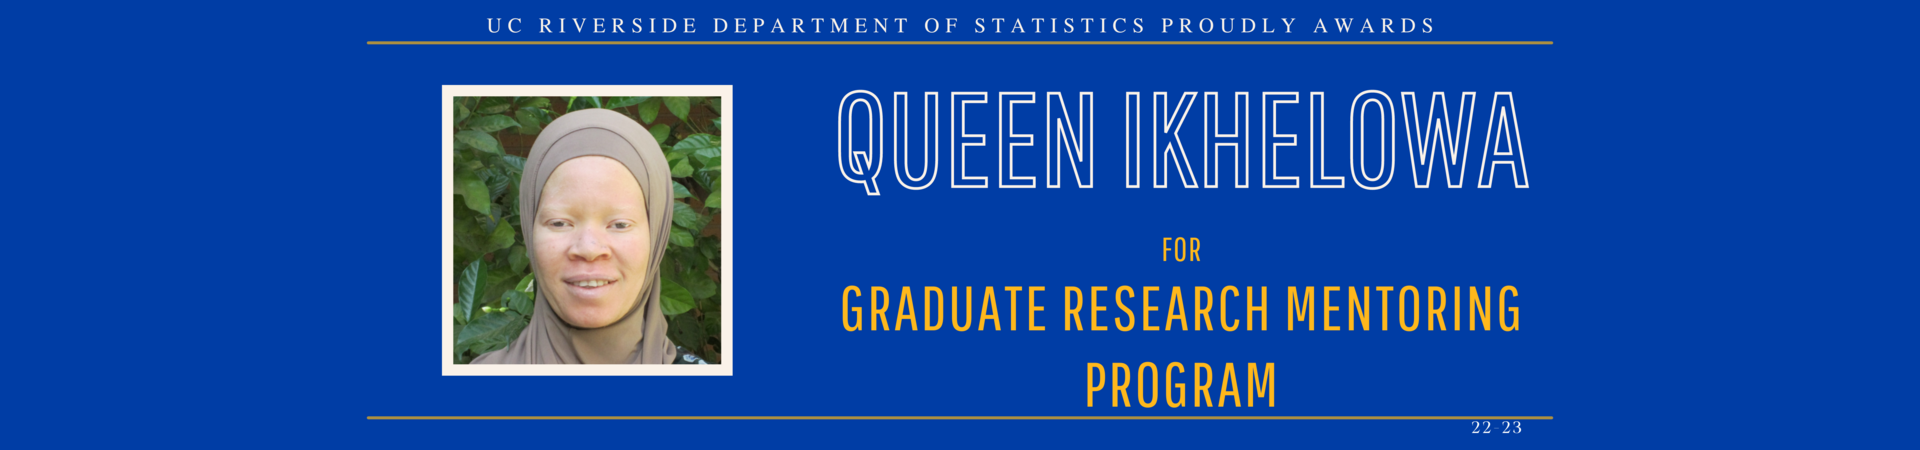 Queen ikhelowa awarded for graduate research mentoring program